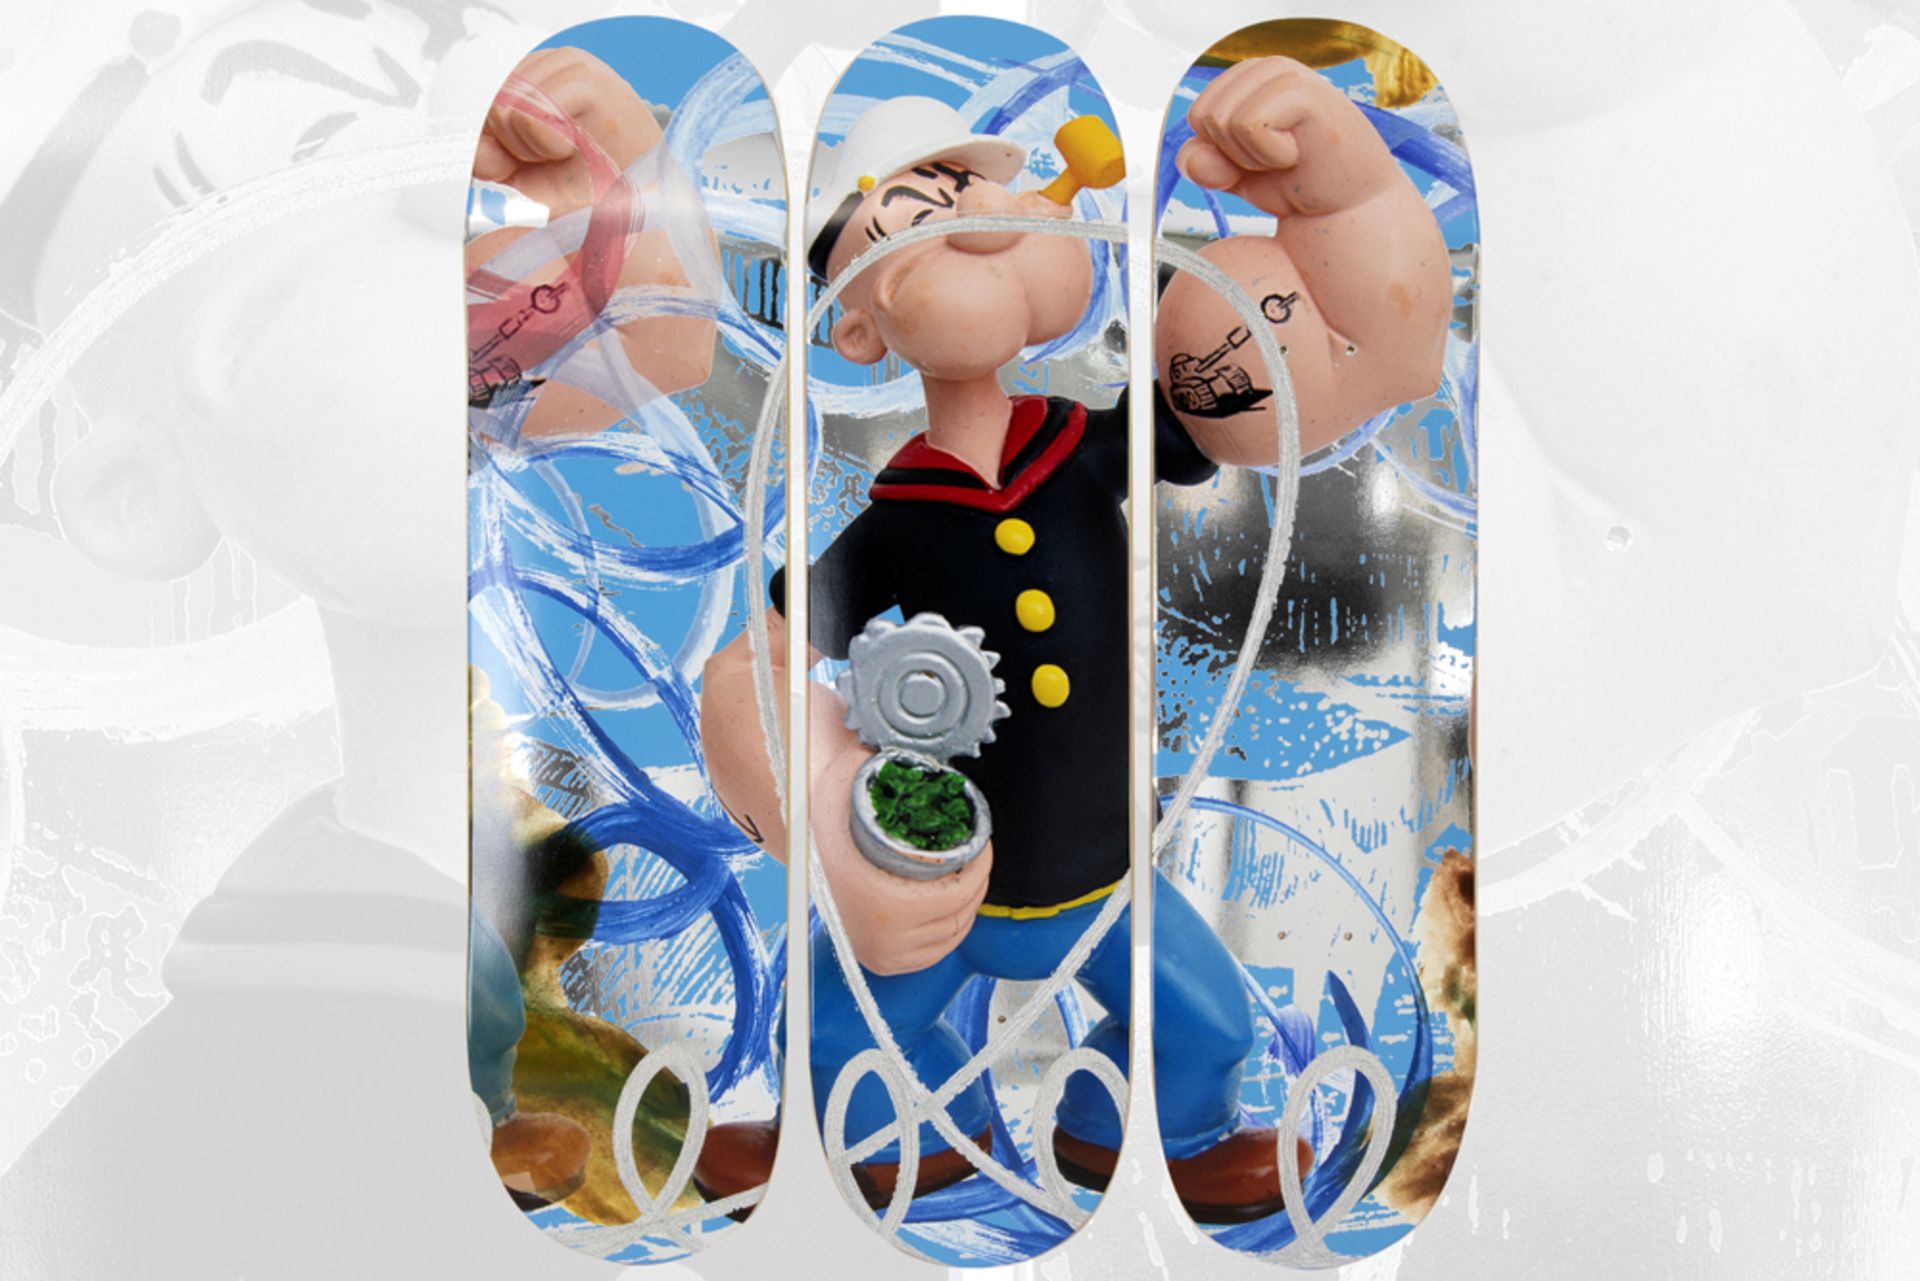 Jeff Koons plate signed "Popeye" triptych on skateboards dd 2021, an edition of 500 ex. with - Image 7 of 8